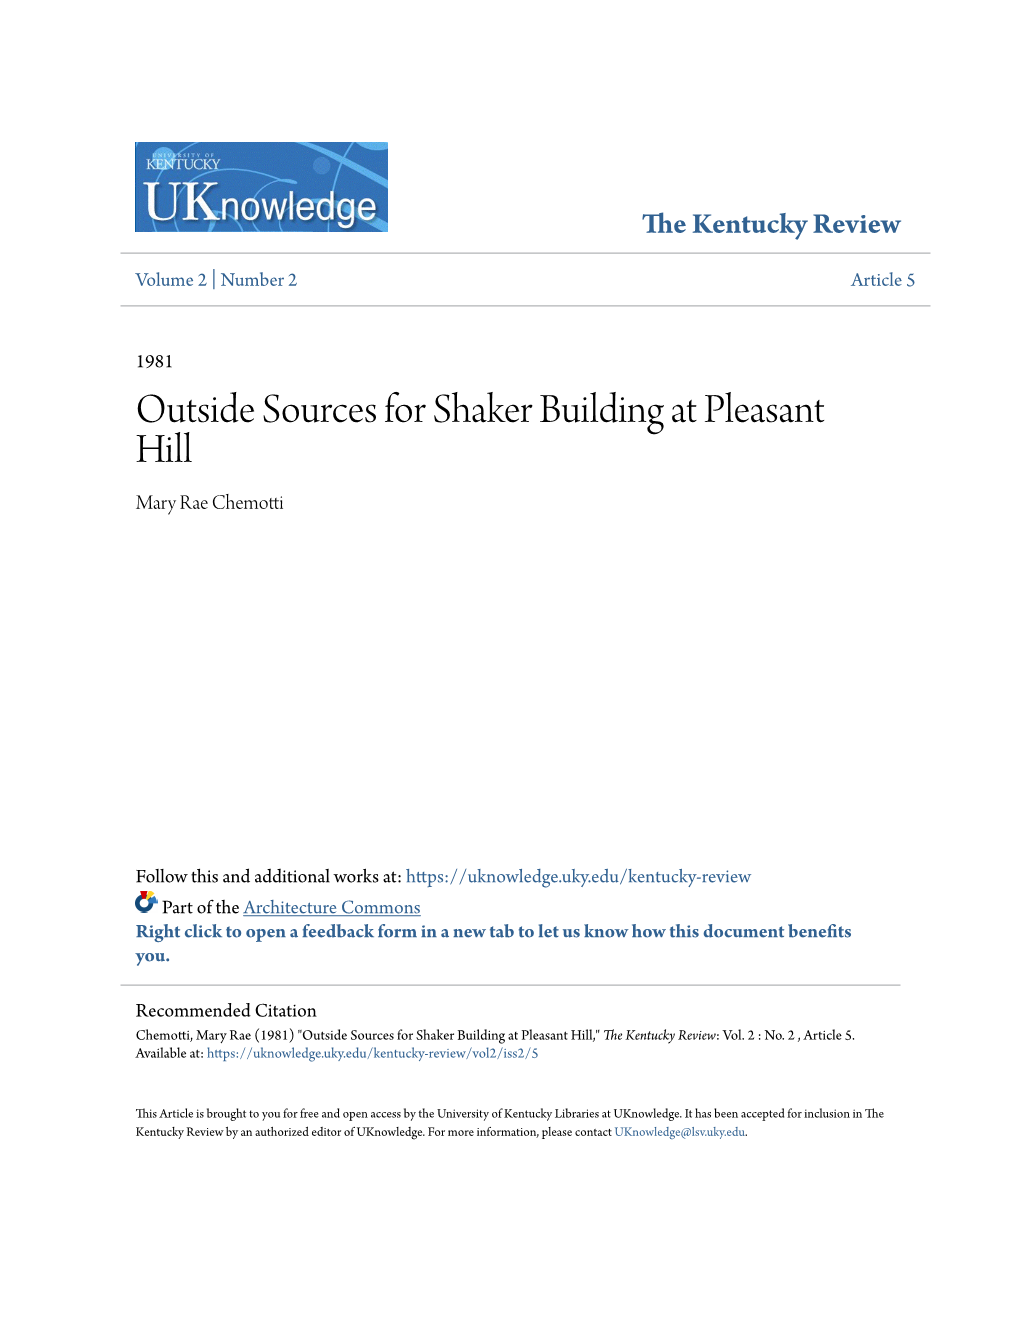 Outside Sources for Shaker Building at Pleasant Hill Mary Rae Chemotti